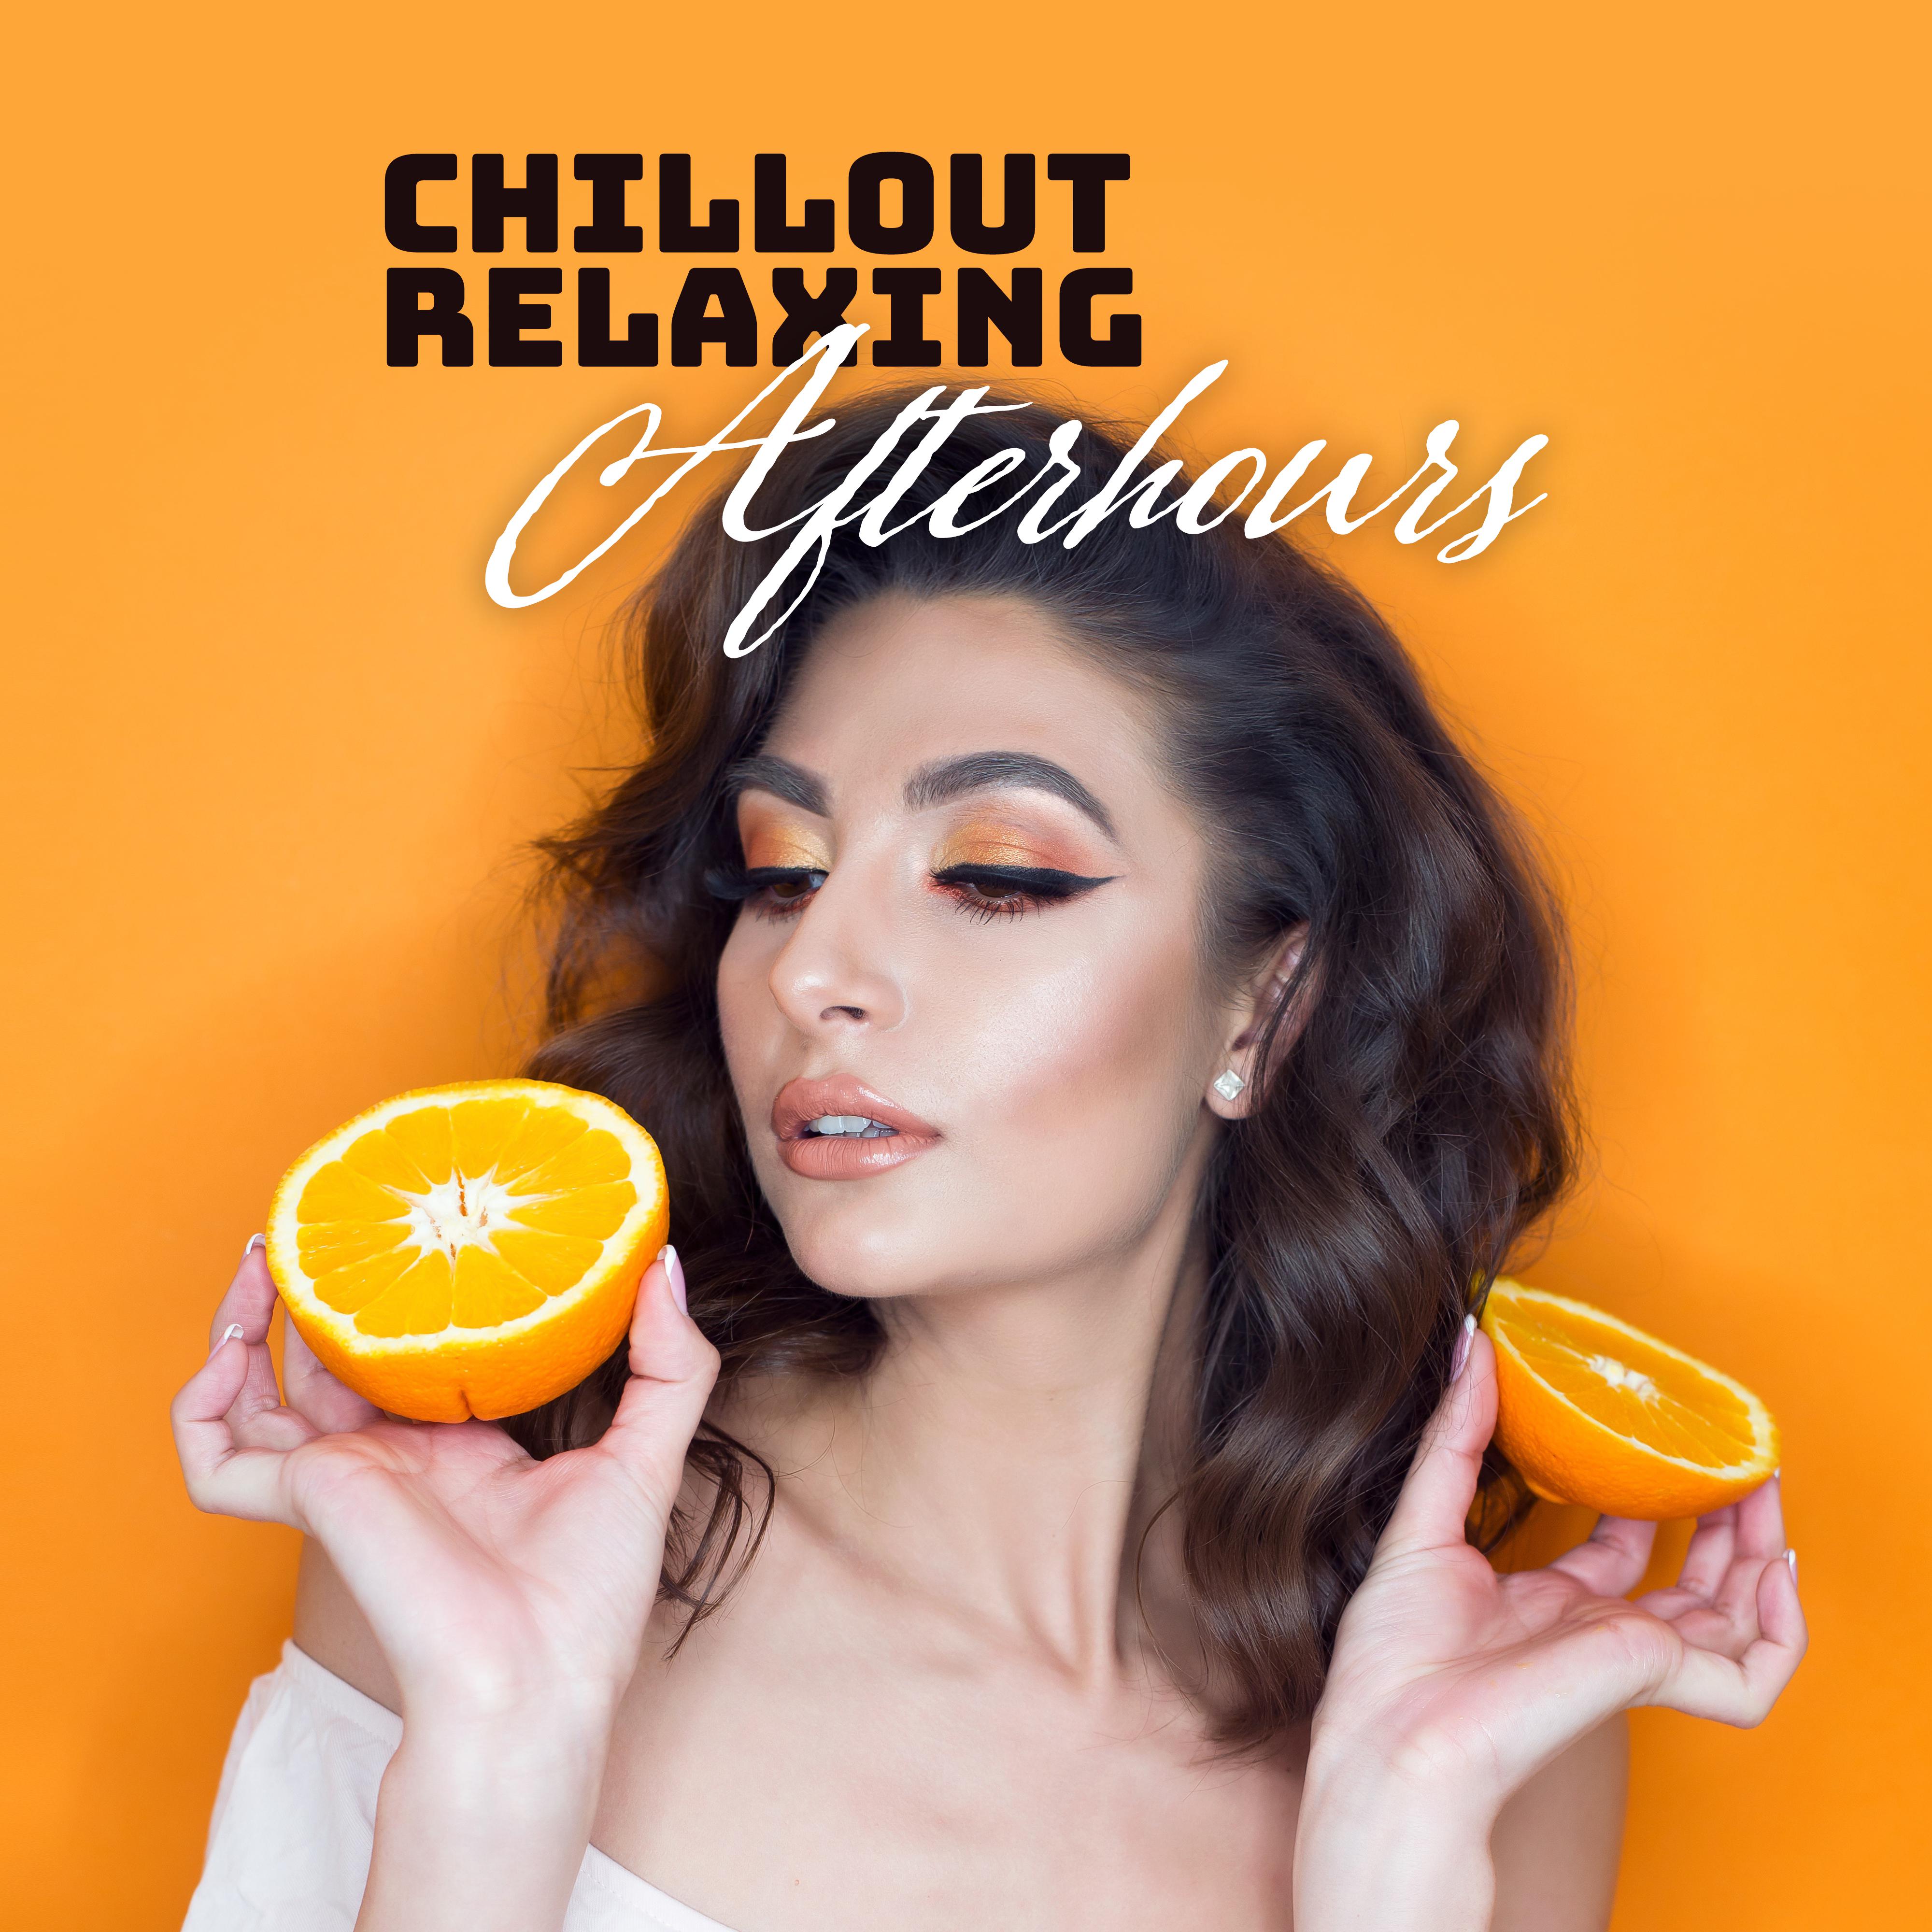 Chillout Relaxing Afterhours: 2019 Chill Out Music for Best Calm & Rest Experience, Relaxation on the Beach, Positive Mood Songs, Slow Soothing Beats